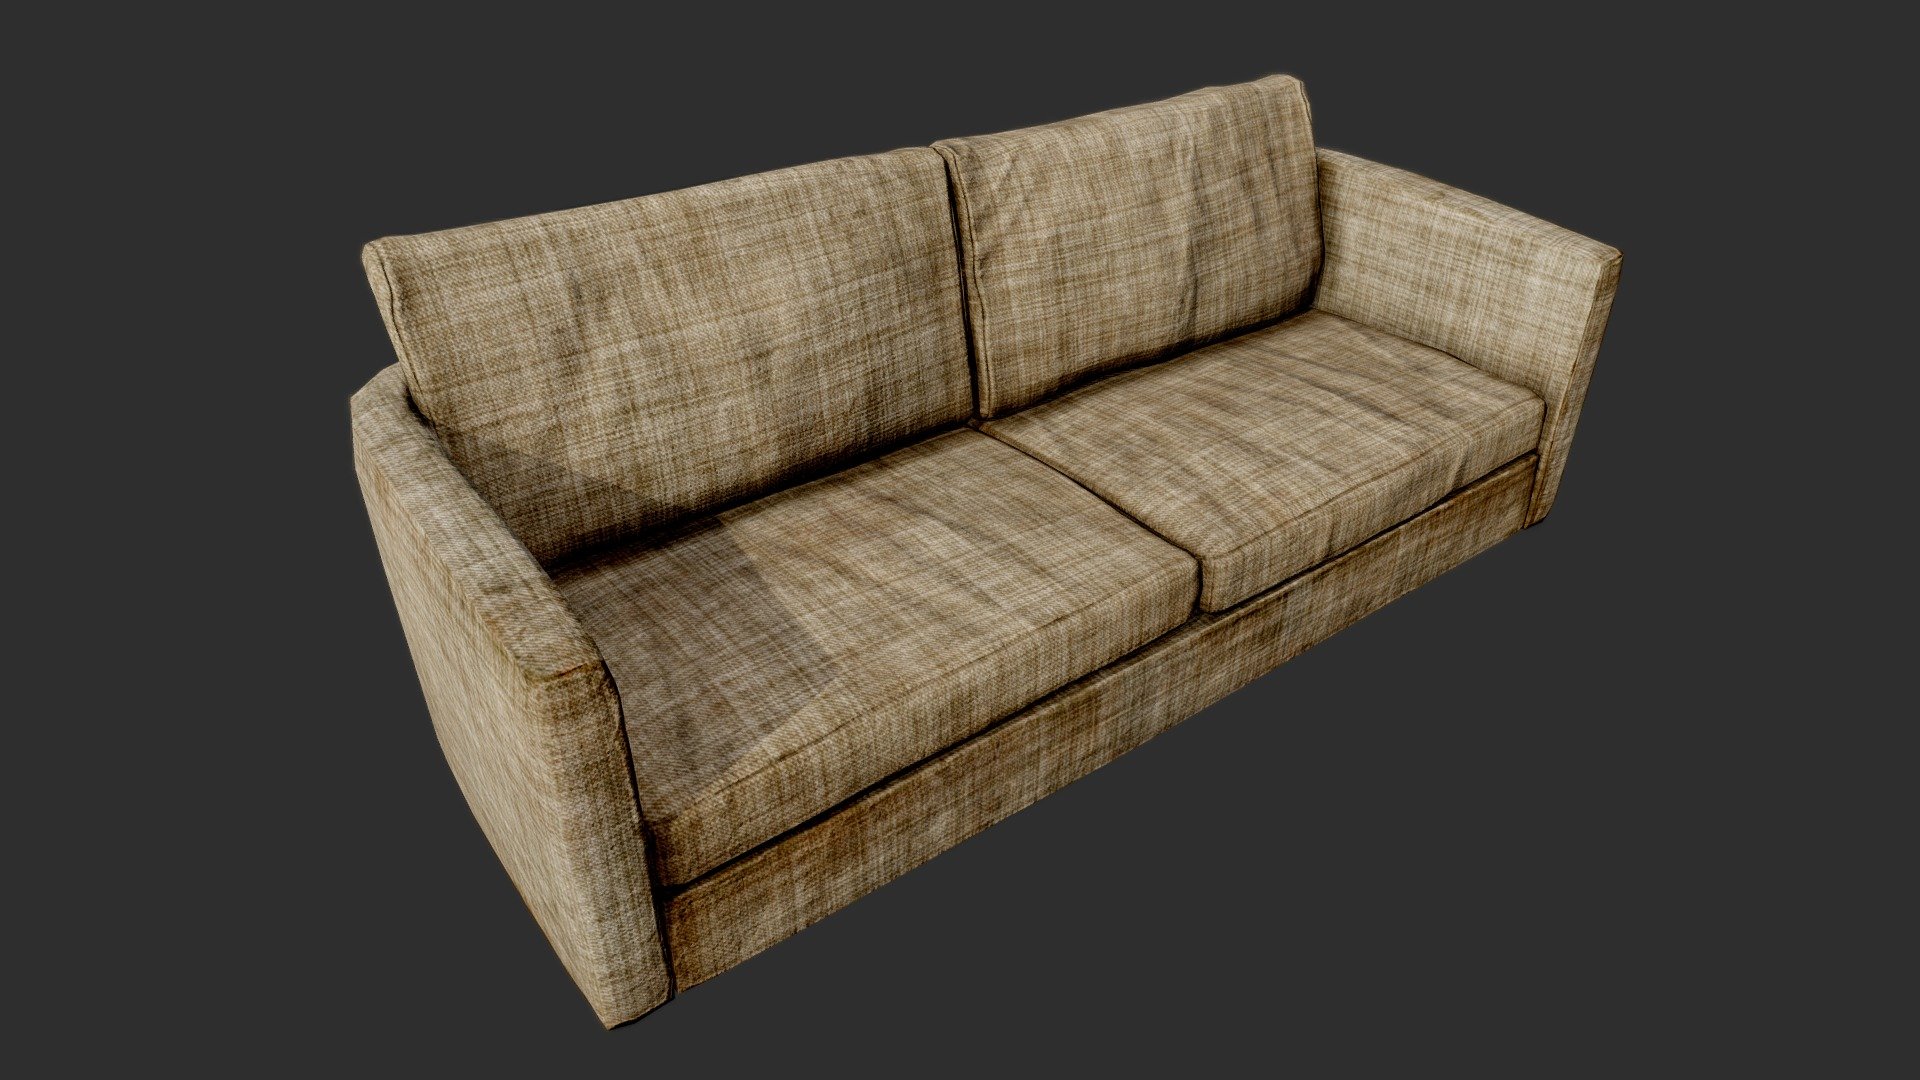 Old Dirty Couch 02 Retro - PBR

Very Detailed Low Poly Retro Old Cotton Couch / Sofa with High-Quality PBR Textures.

Fits perfect for any PBR game as Decoration etc. like Post Apocalyptic Environment or Horror Games for example

Created with 3DSMAX, Zbrush and Substance Painter.

Standard Textures
Base Color, Metallic, Roughness, Height, AO, Normal, Maps

Unreal 4 Textures
Base Color, Normal, OcclusionRoughnessMetallic

Unity 5/2017 Textures
Albedo, SpecularSmoothness, Normal, and AO Maps

2 x 4096x4096 TGA Textures

Please Note, this PBR Textures Only. 

Low Poly Triangles 

3778 Tris
1901 Verts

File Formats :

.Max2018
.Max2017
.Max2016
.Max2015
.FBX
.OBJ
.3DS
.DAE - Old Dirty Couch 02 Retro - PBR - Buy Royalty Free 3D model by GamePoly (@triix3d) 3d model